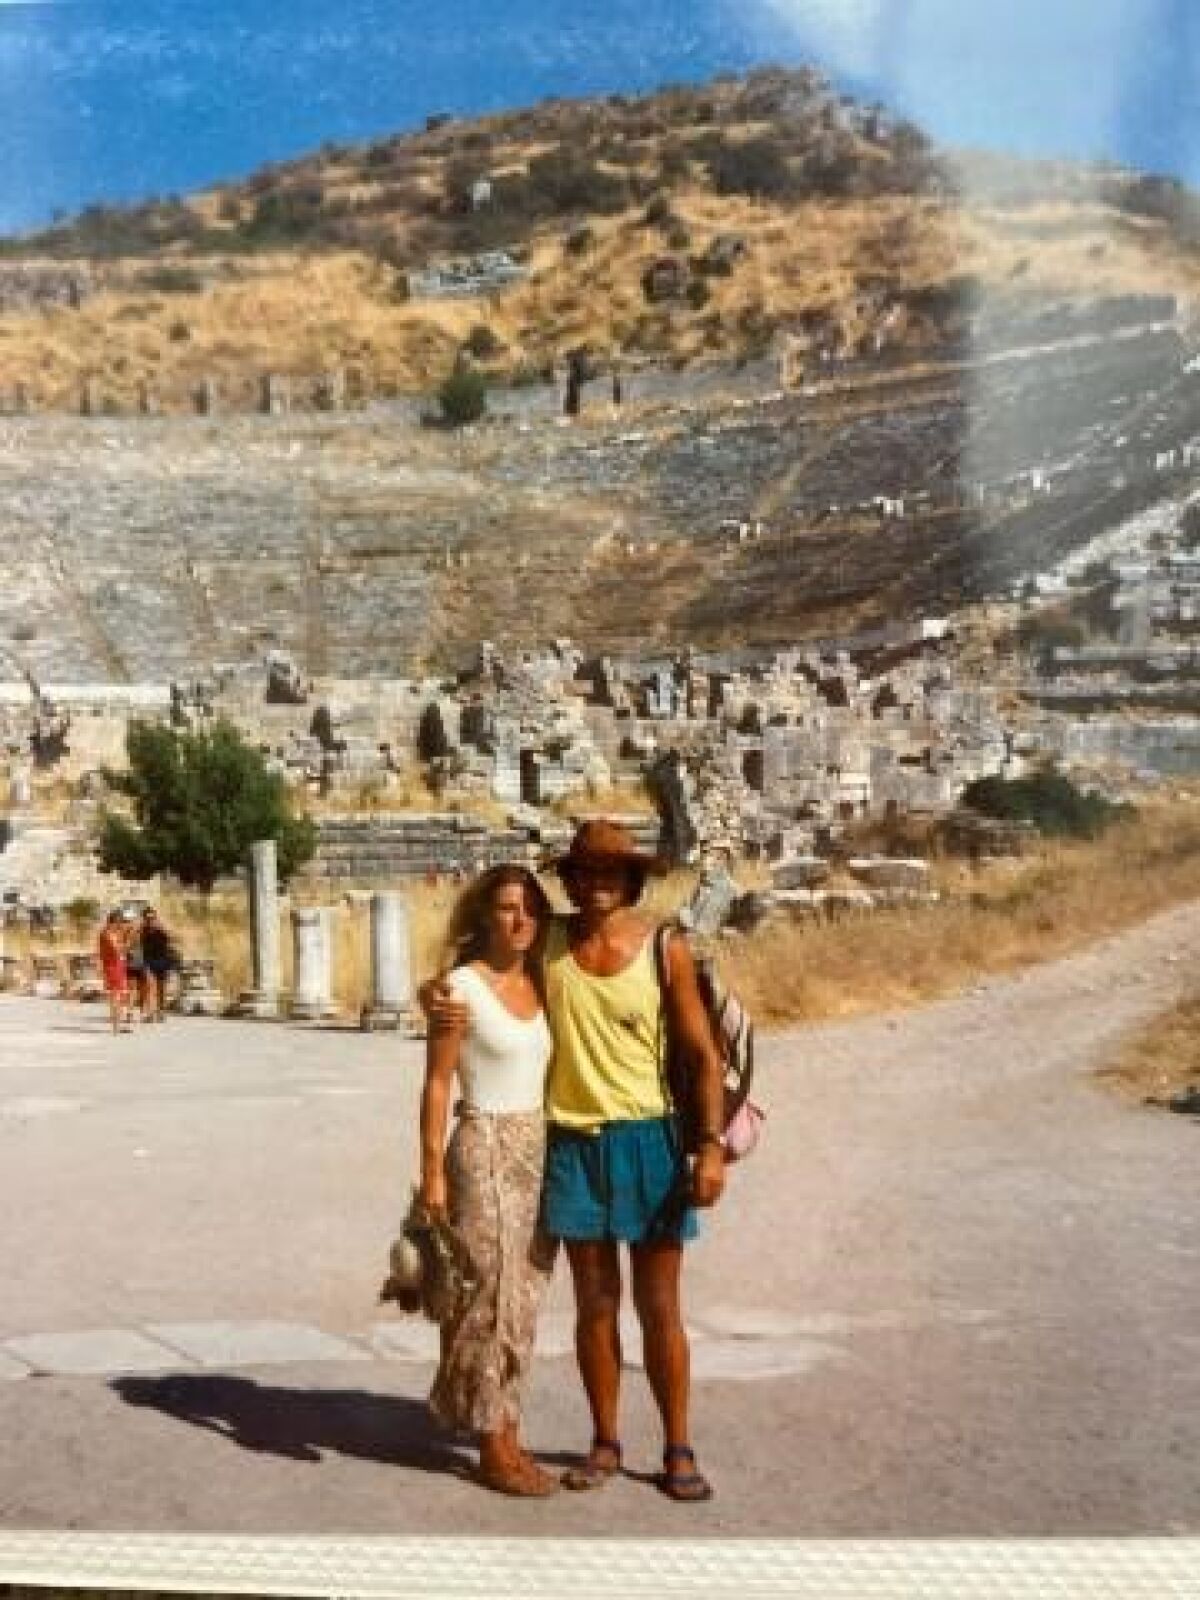 Tina and Peter Andrew during their travels to Turkey in the 1990s and the ruins of the Greek amphitheater in Ephesus.